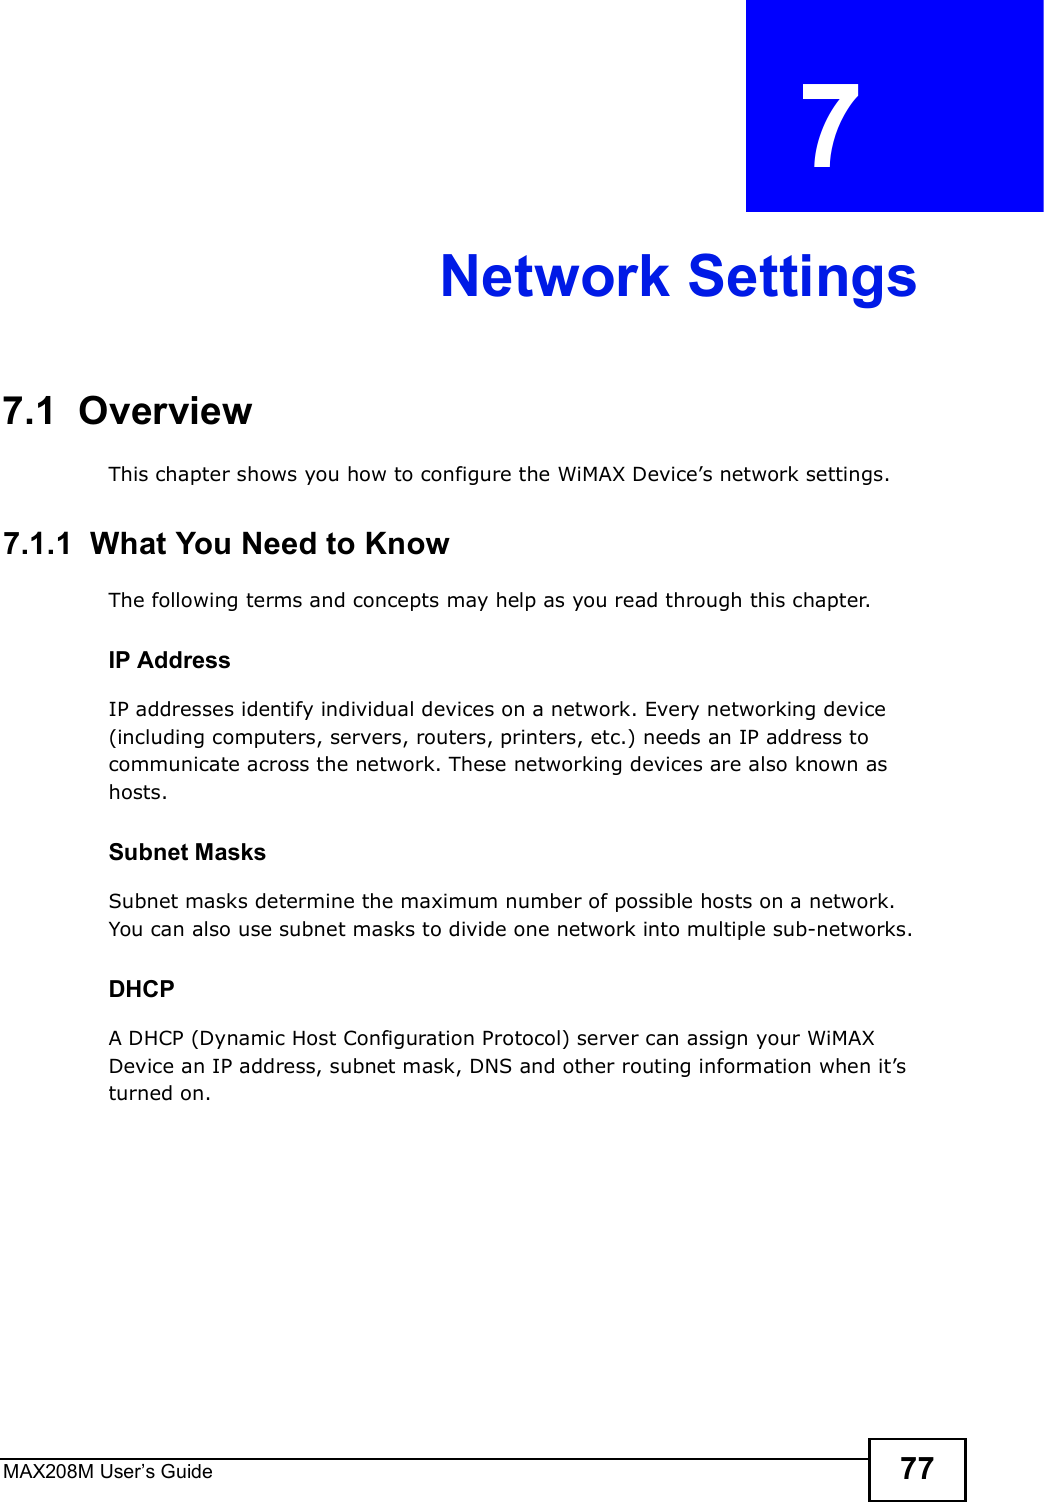 MAX208M User s Guide 77CHAPTER  7 Network Settings7.1  OverviewThis chapter shows you how to configure the WiMAX Device s network settings.7.1.1  What You Need to KnowThe following terms and concepts may help as you read through this chapter.IP AddressIP addresses identify individual devices on a network. Every networking device (including computers, servers, routers, printers, etc.) needs an IP address to communicate across the network. These networking devices are also known as hosts.Subnet MasksSubnet masks determine the maximum number of possible hosts on a network. You can also use subnet masks to divide one network into multiple sub-networks.DHCPA DHCP (Dynamic Host Configuration Protocol) server can assign your WiMAX Device an IP address, subnet mask, DNS and other routing information when it s turned on.